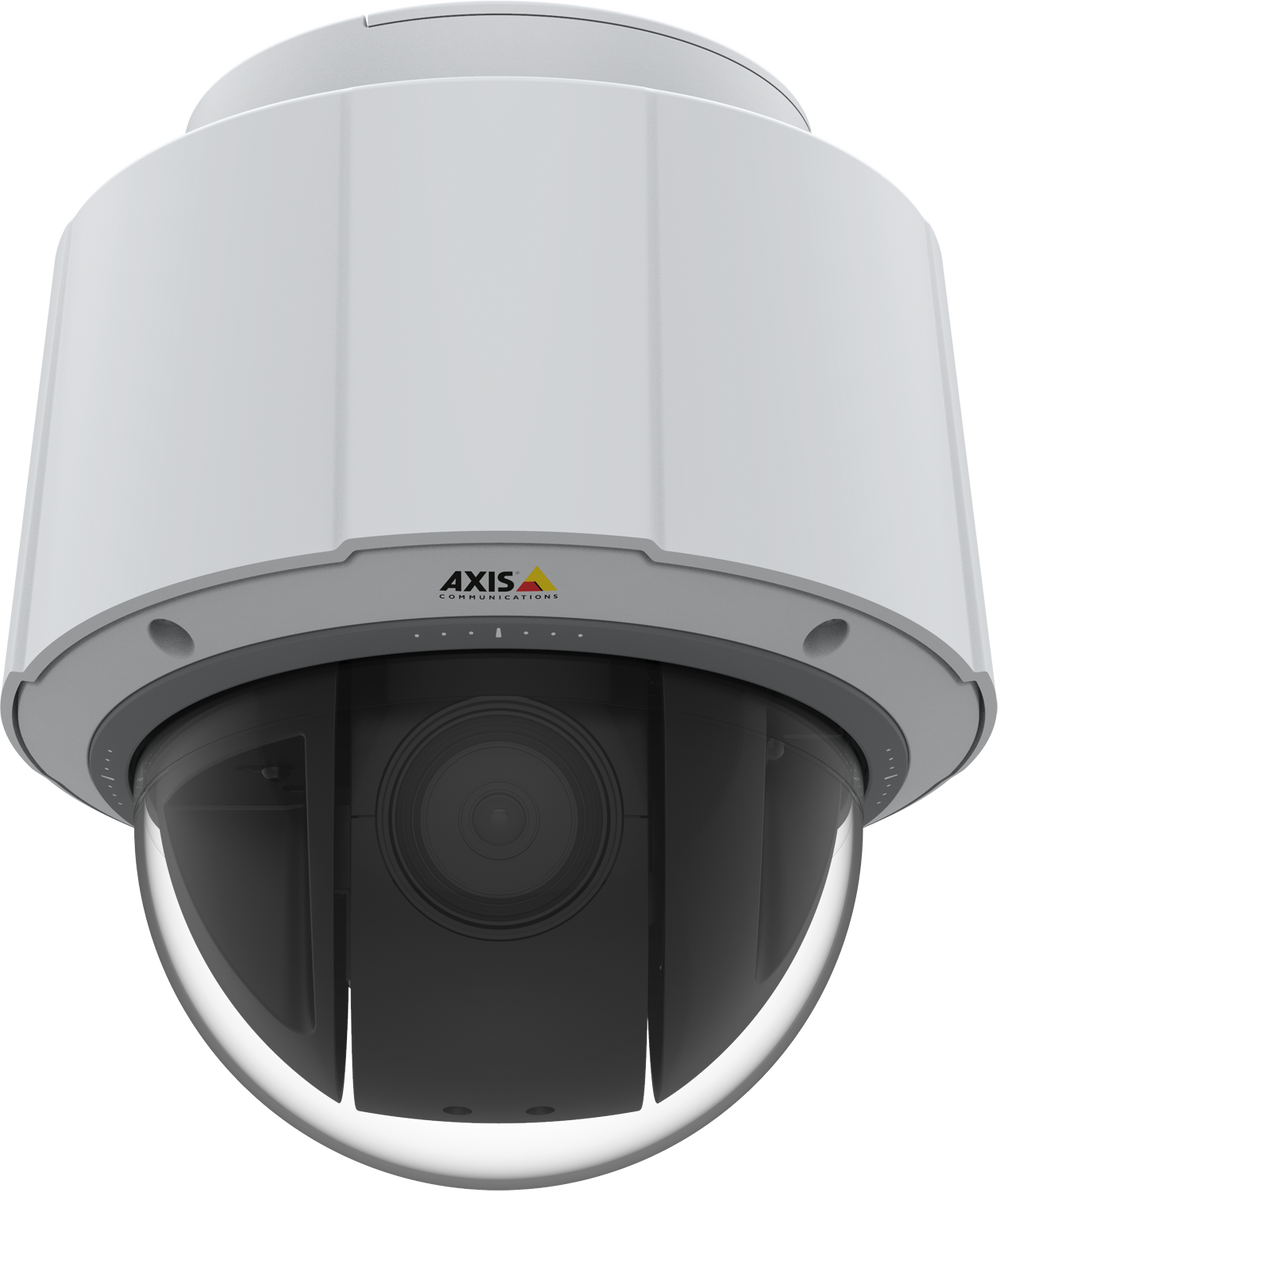 AXIS Q6074 60HZ Indoor PTZ with HDTV 720p and 30x optical zoom